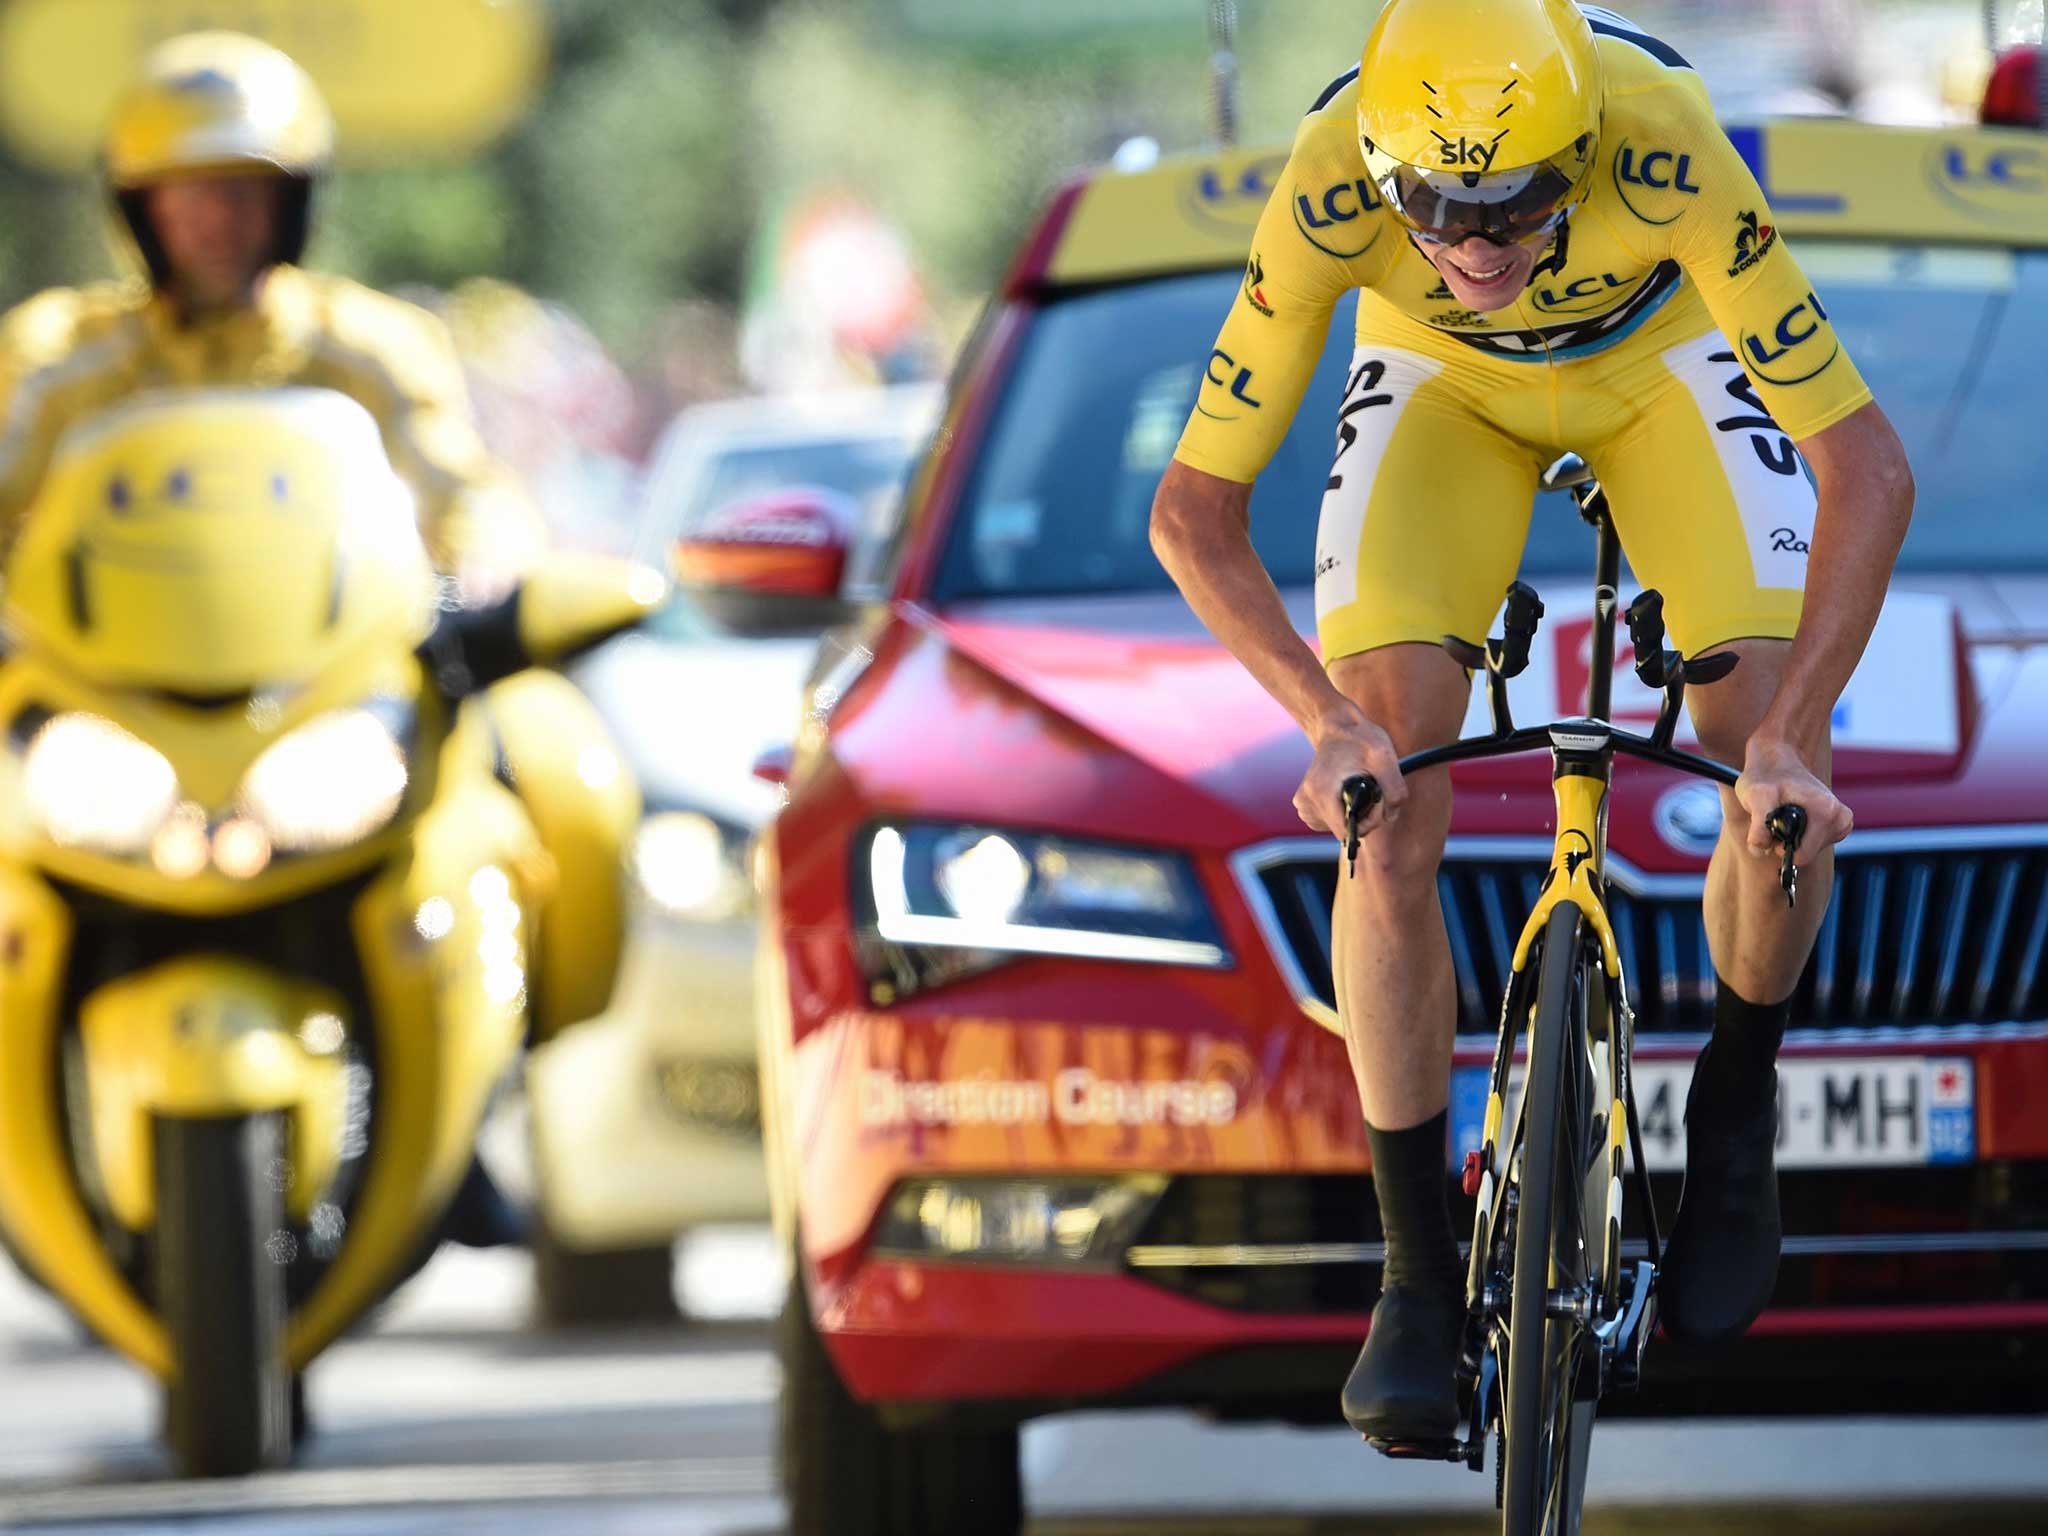 Chris Froome continued his dominance on Thursday